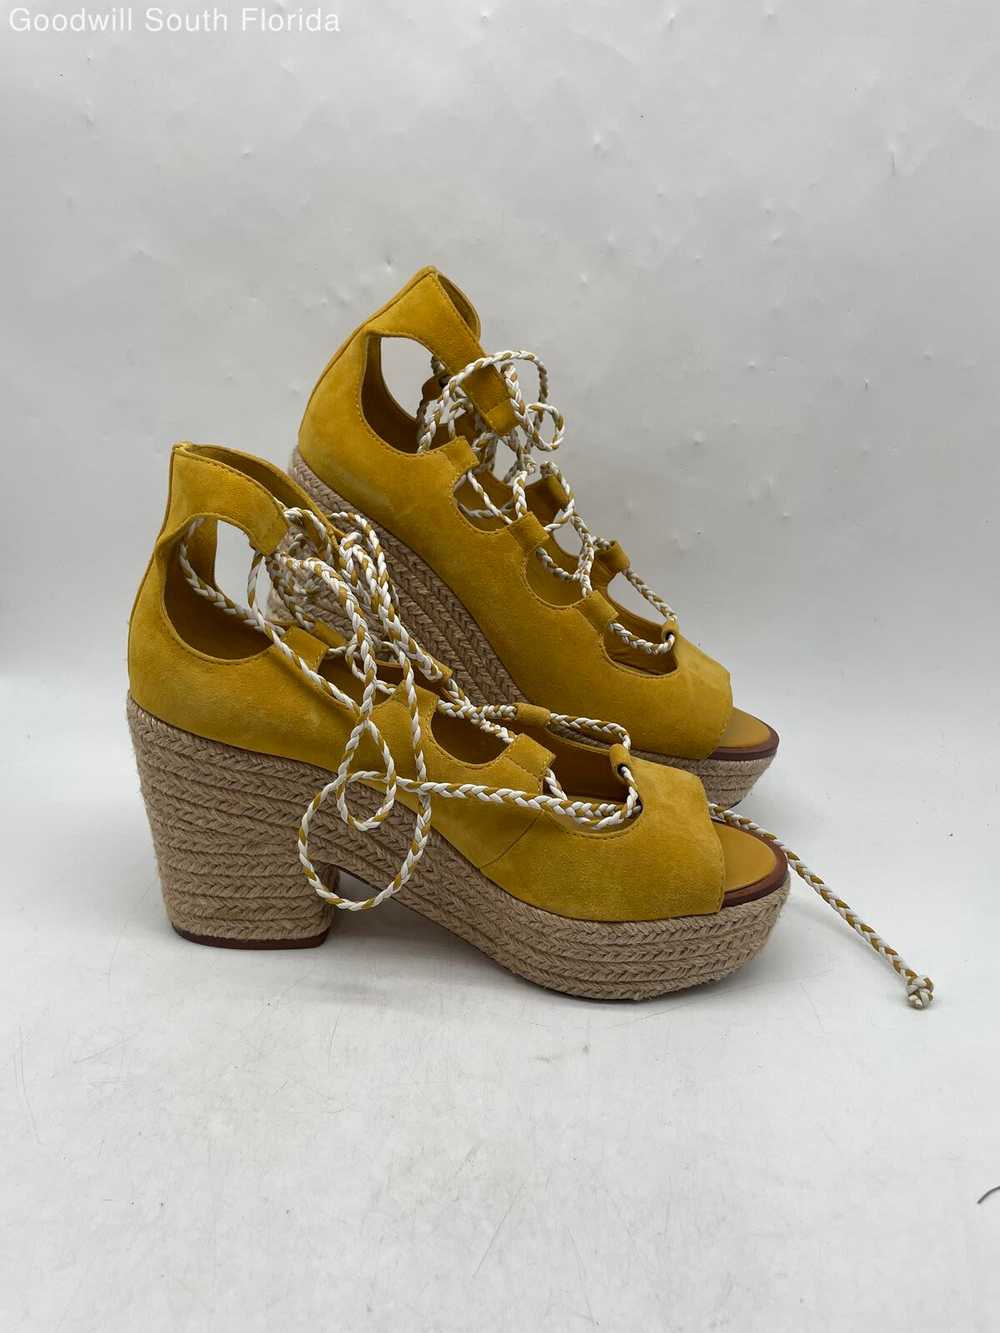 Tory Burch Womens Yellow Shoes Size 10 - image 2